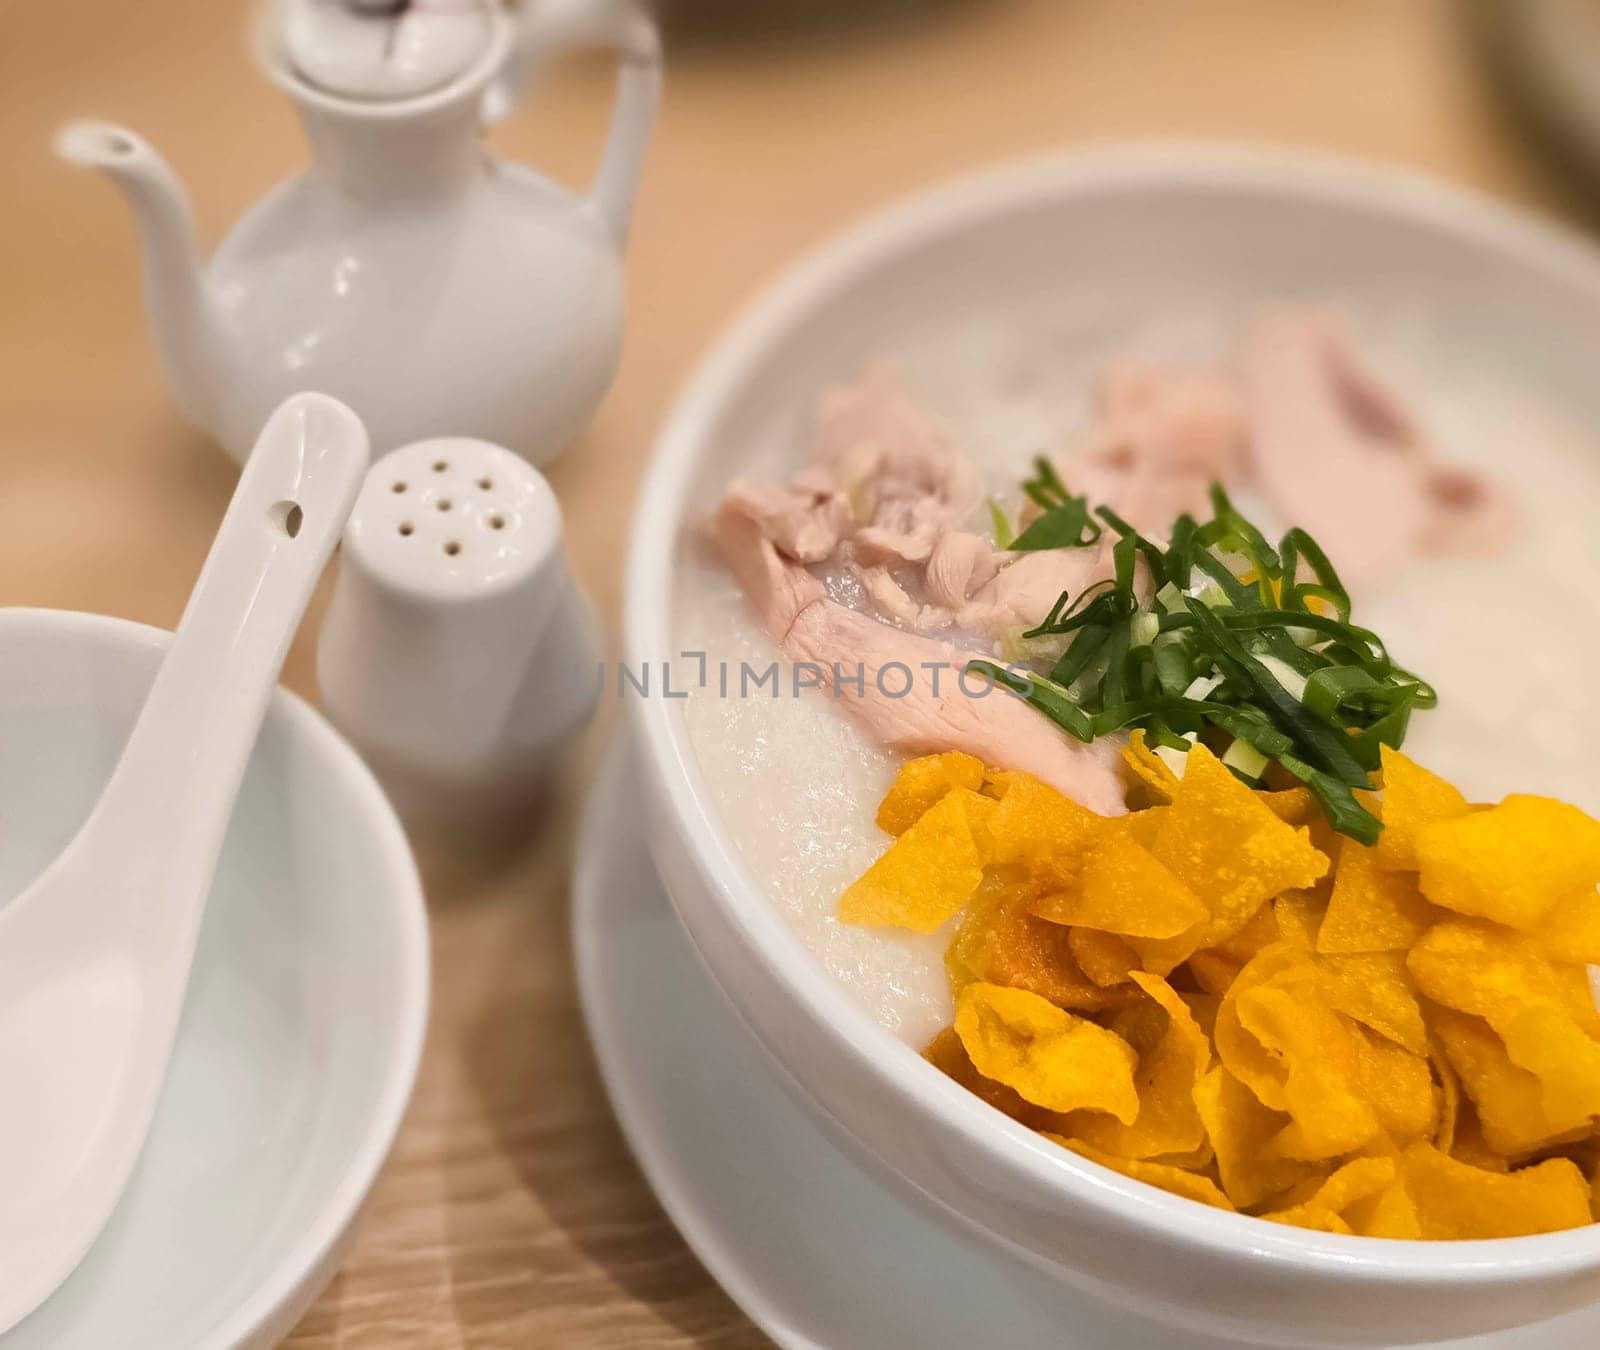 rice porridge with shredded chicken called bubur ayam served with crackers and sliced spring onion and others condiments by antoksena